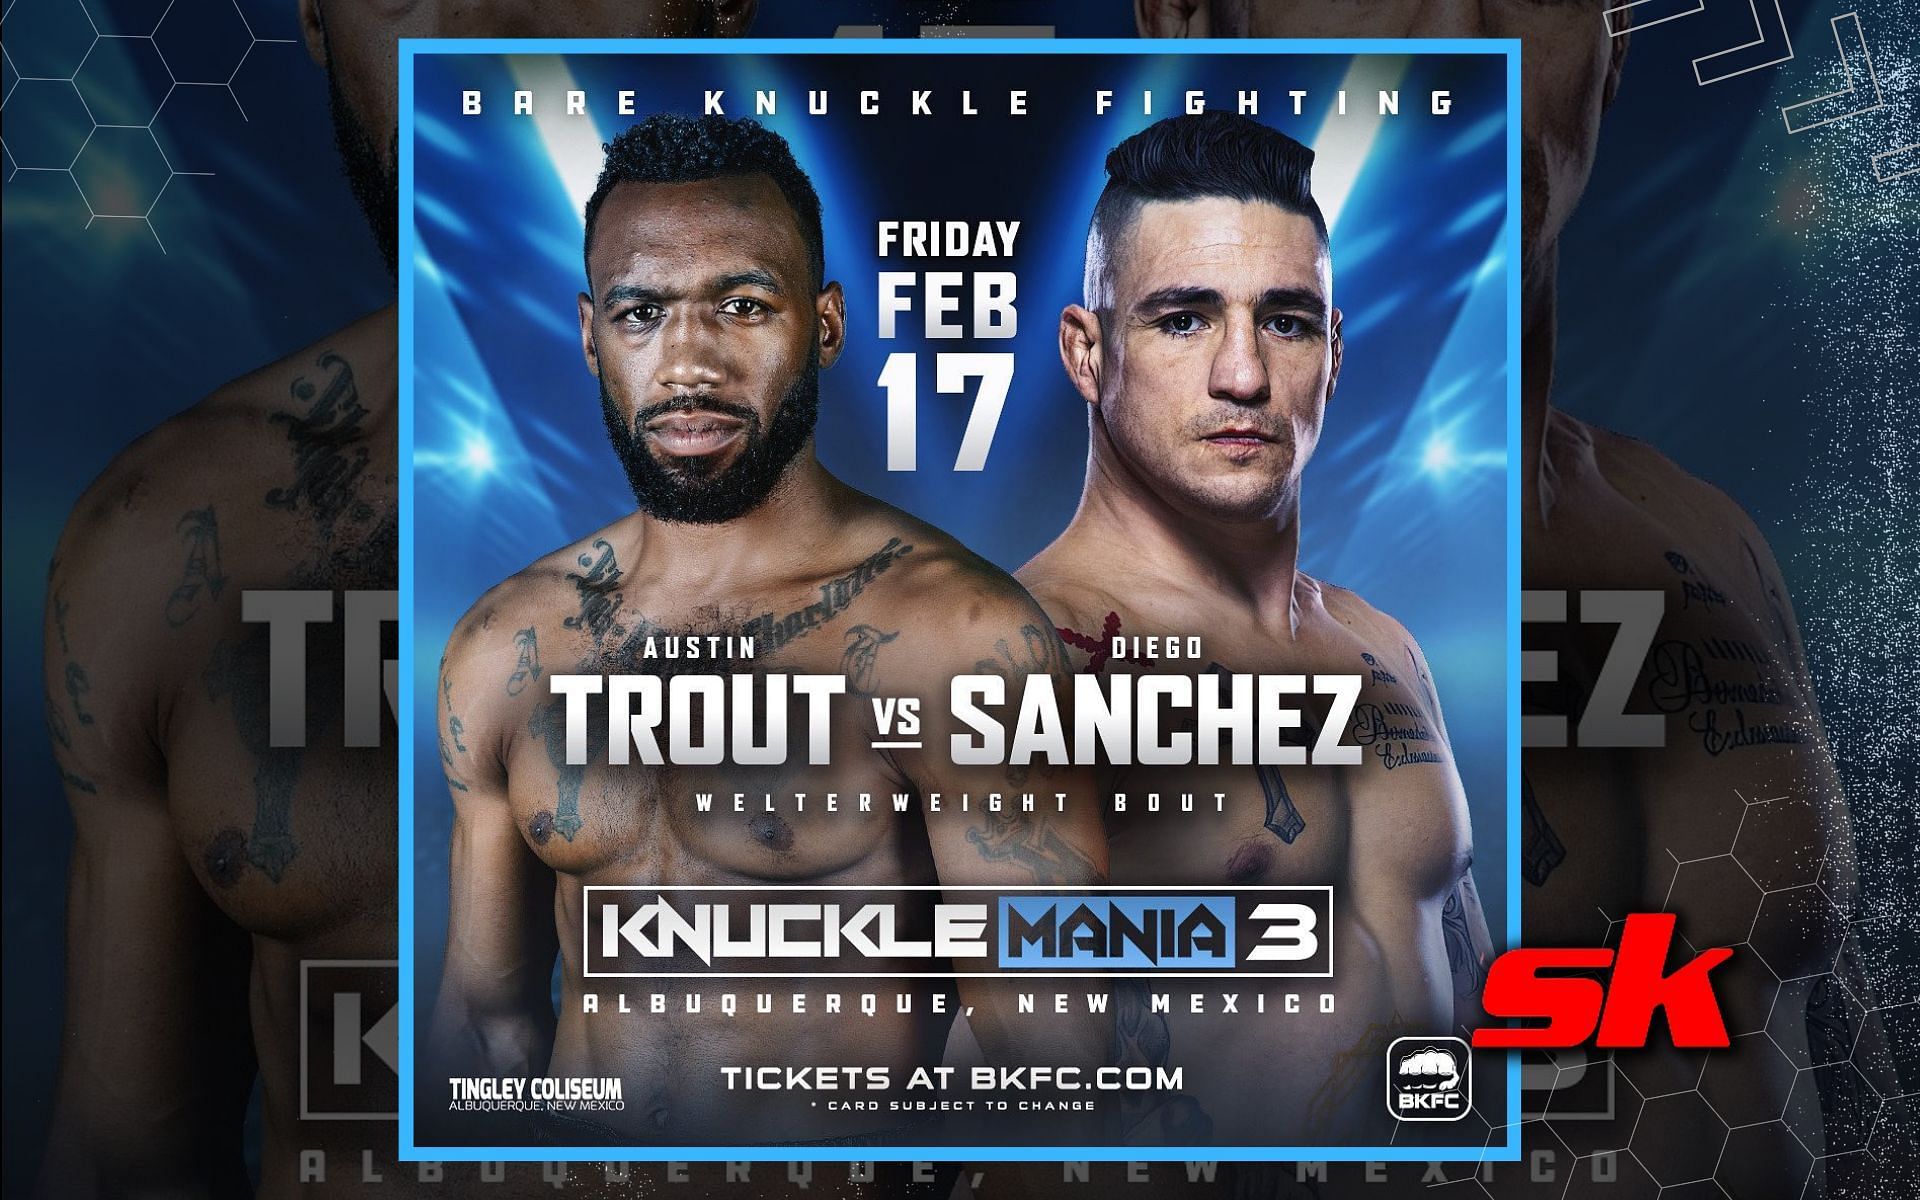 UFC Hall-of-Famer Diego Sanchez cleared to make his BKFC debut against professional boxer Austin Trout. [Image credits: @bareknucklefc on Instagram]